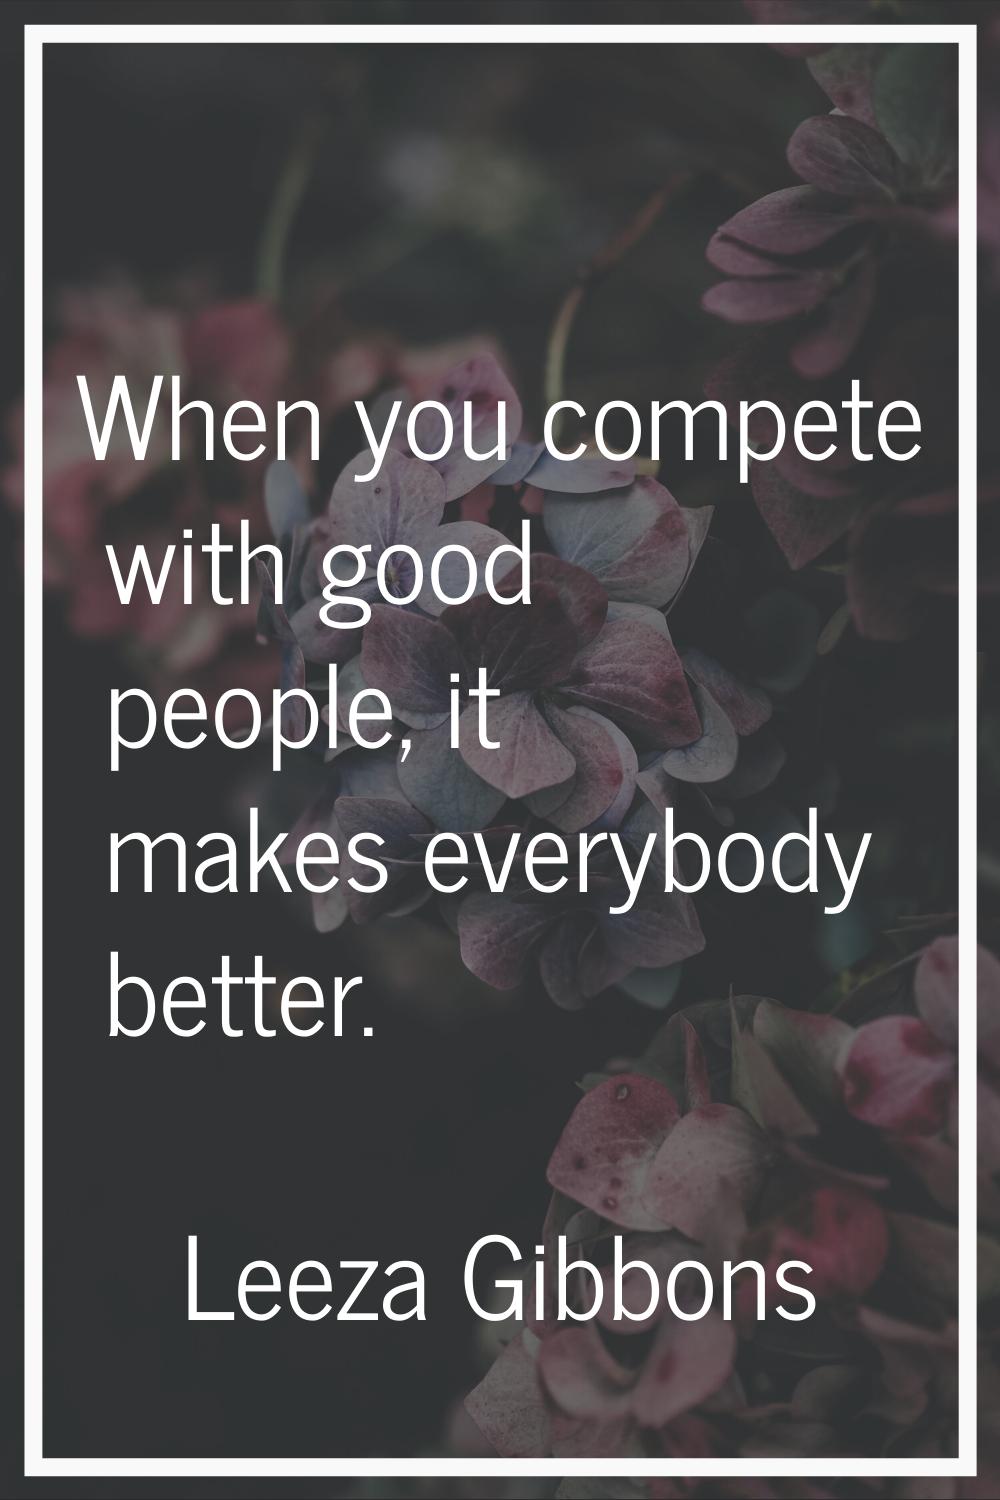 When you compete with good people, it makes everybody better.